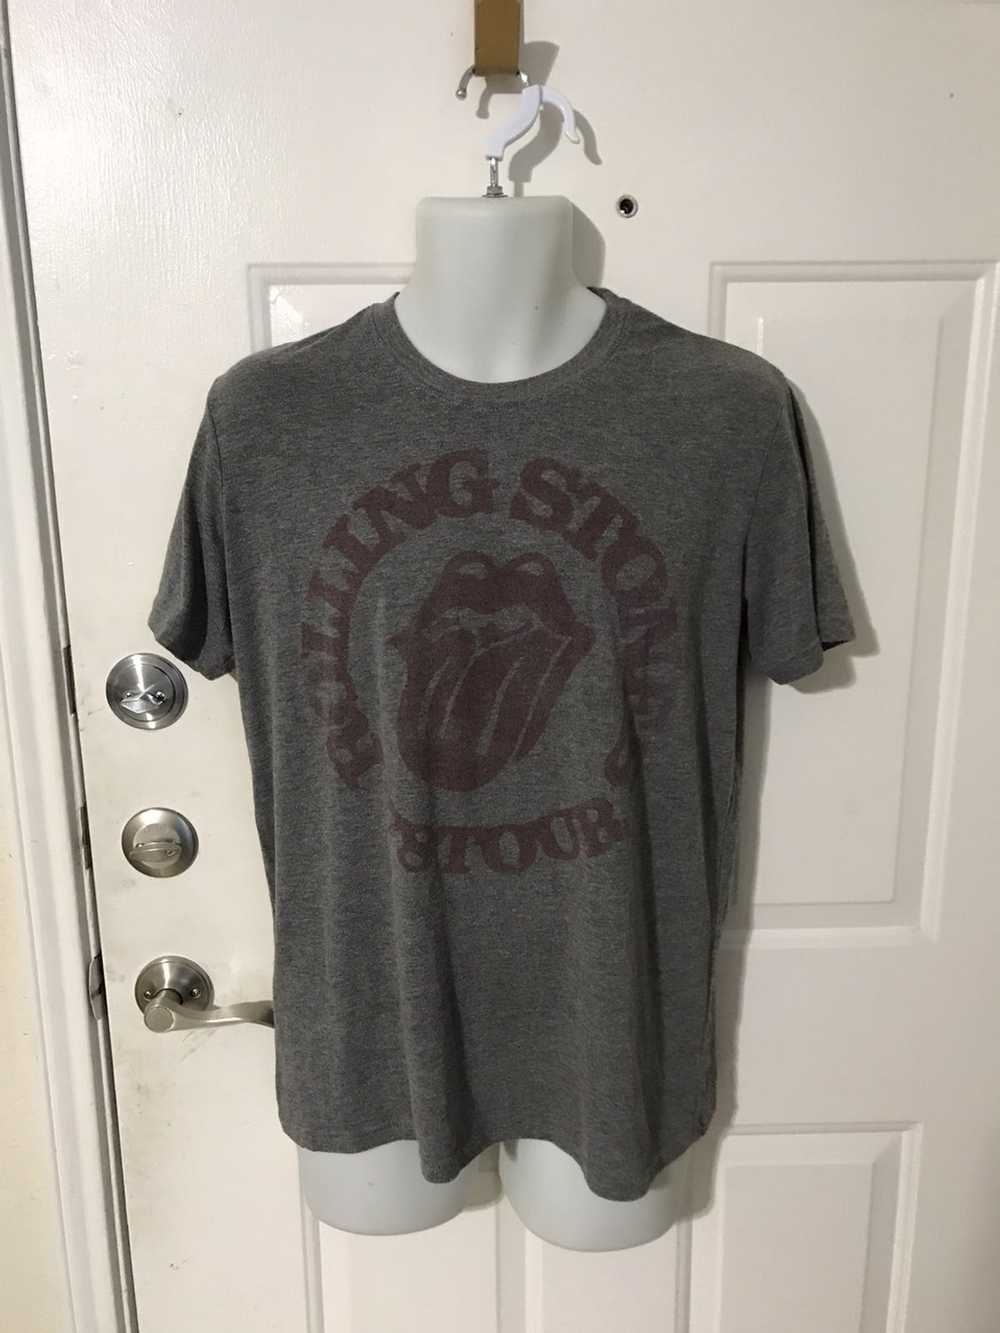 Band Tees × The Rolling Stones × Vintage Rolling … - image 1